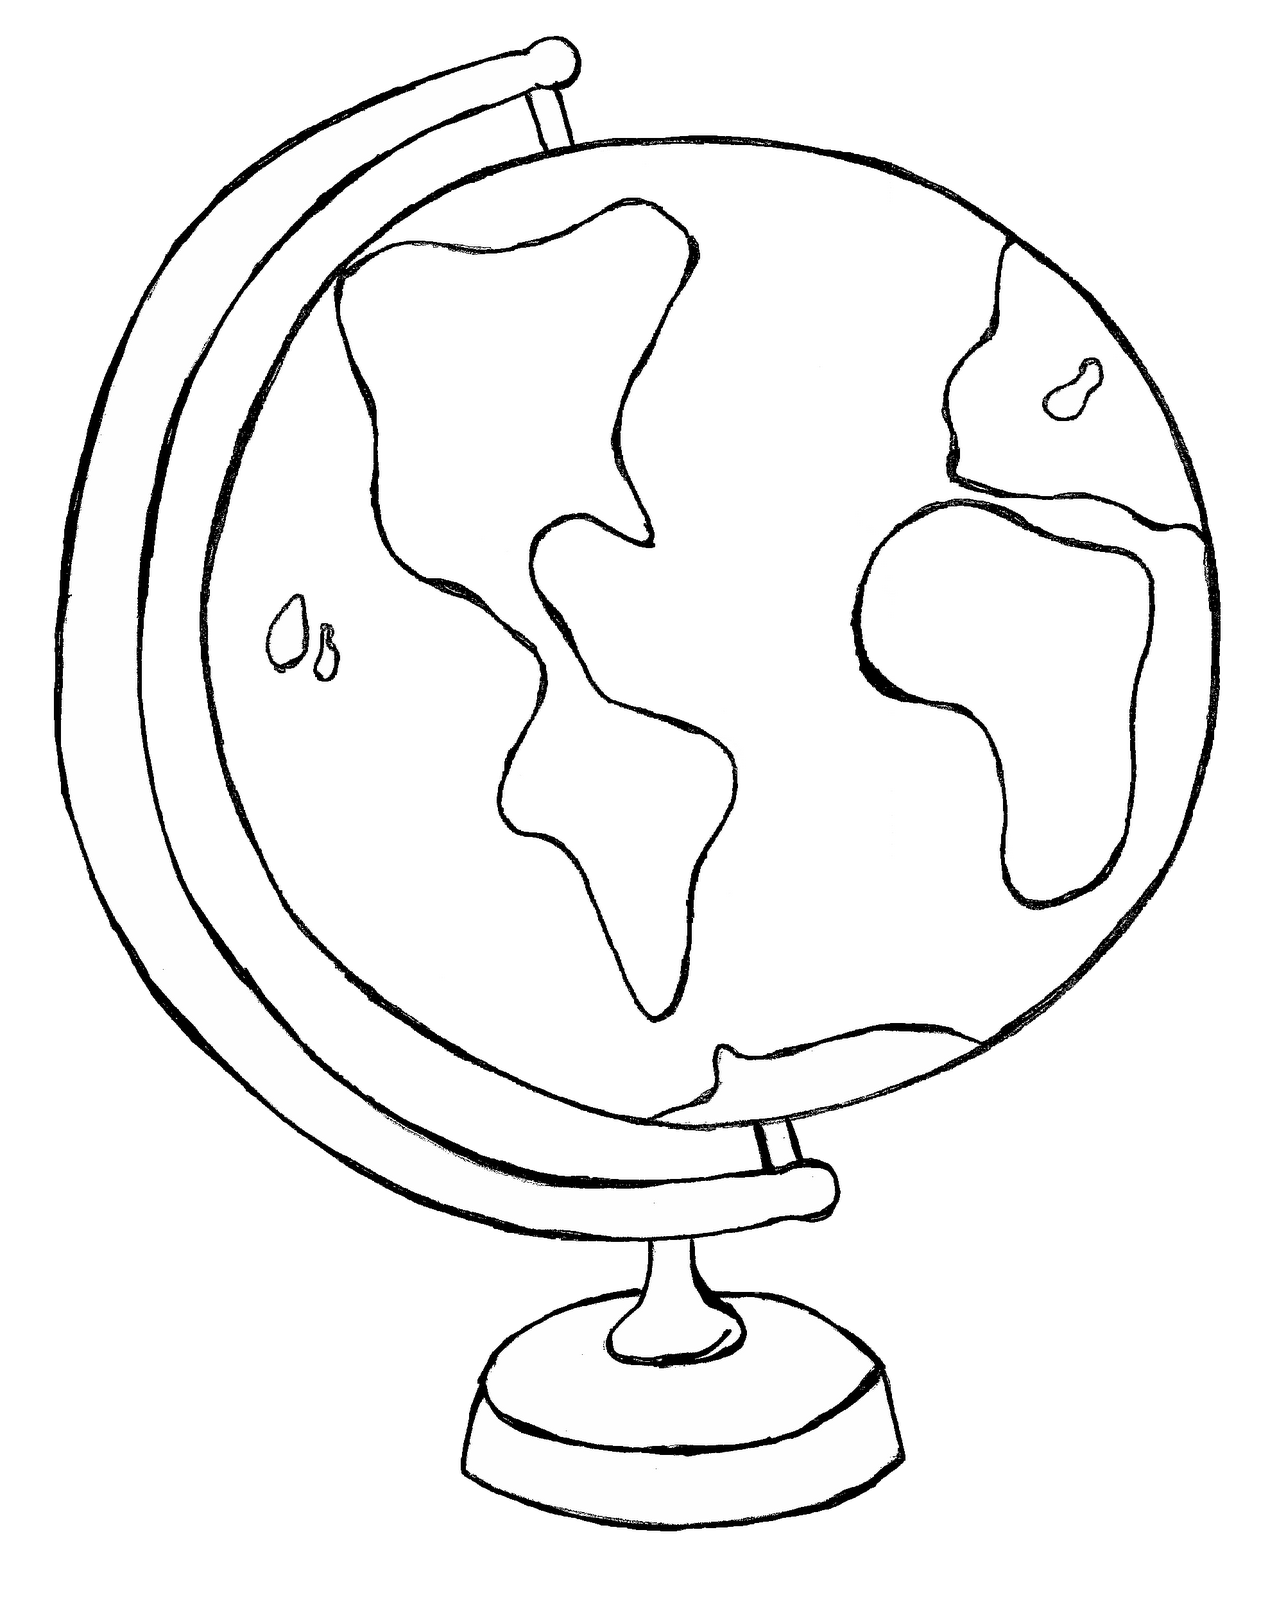 Clip art of world clipart 2 image 5